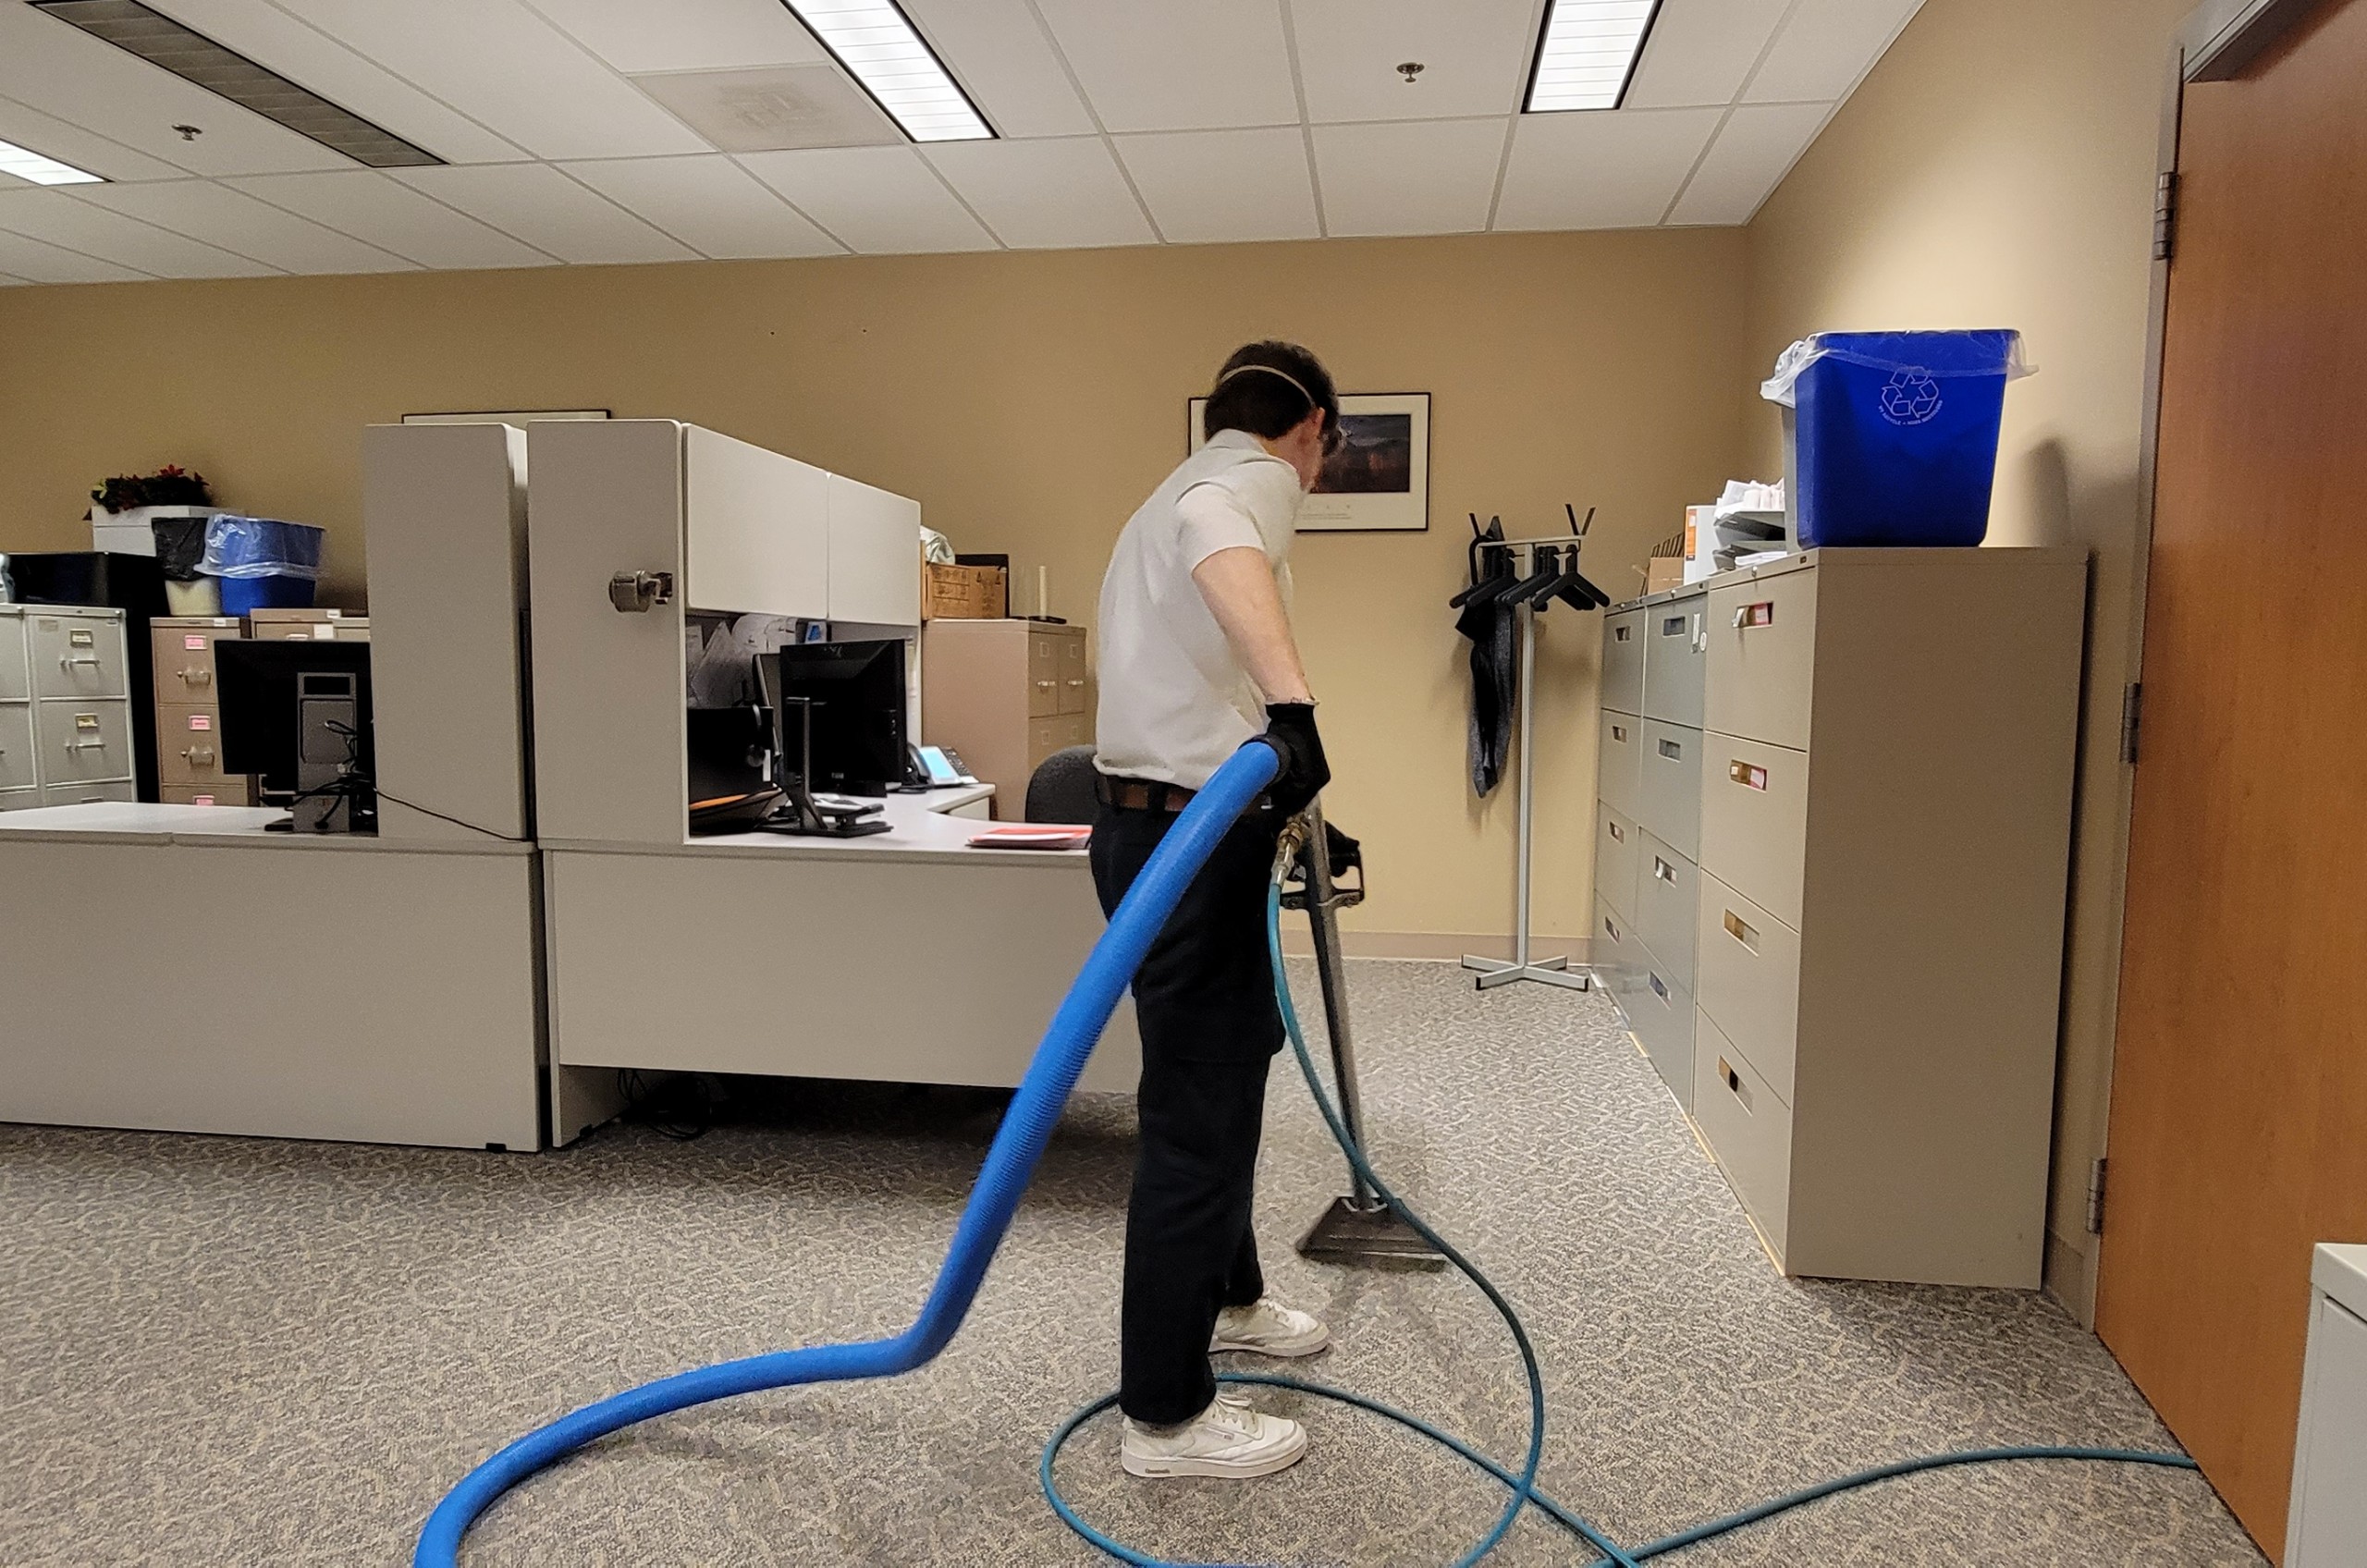 Professional commercial carpet cleaning in whitby, ajax , pickering, oshawa